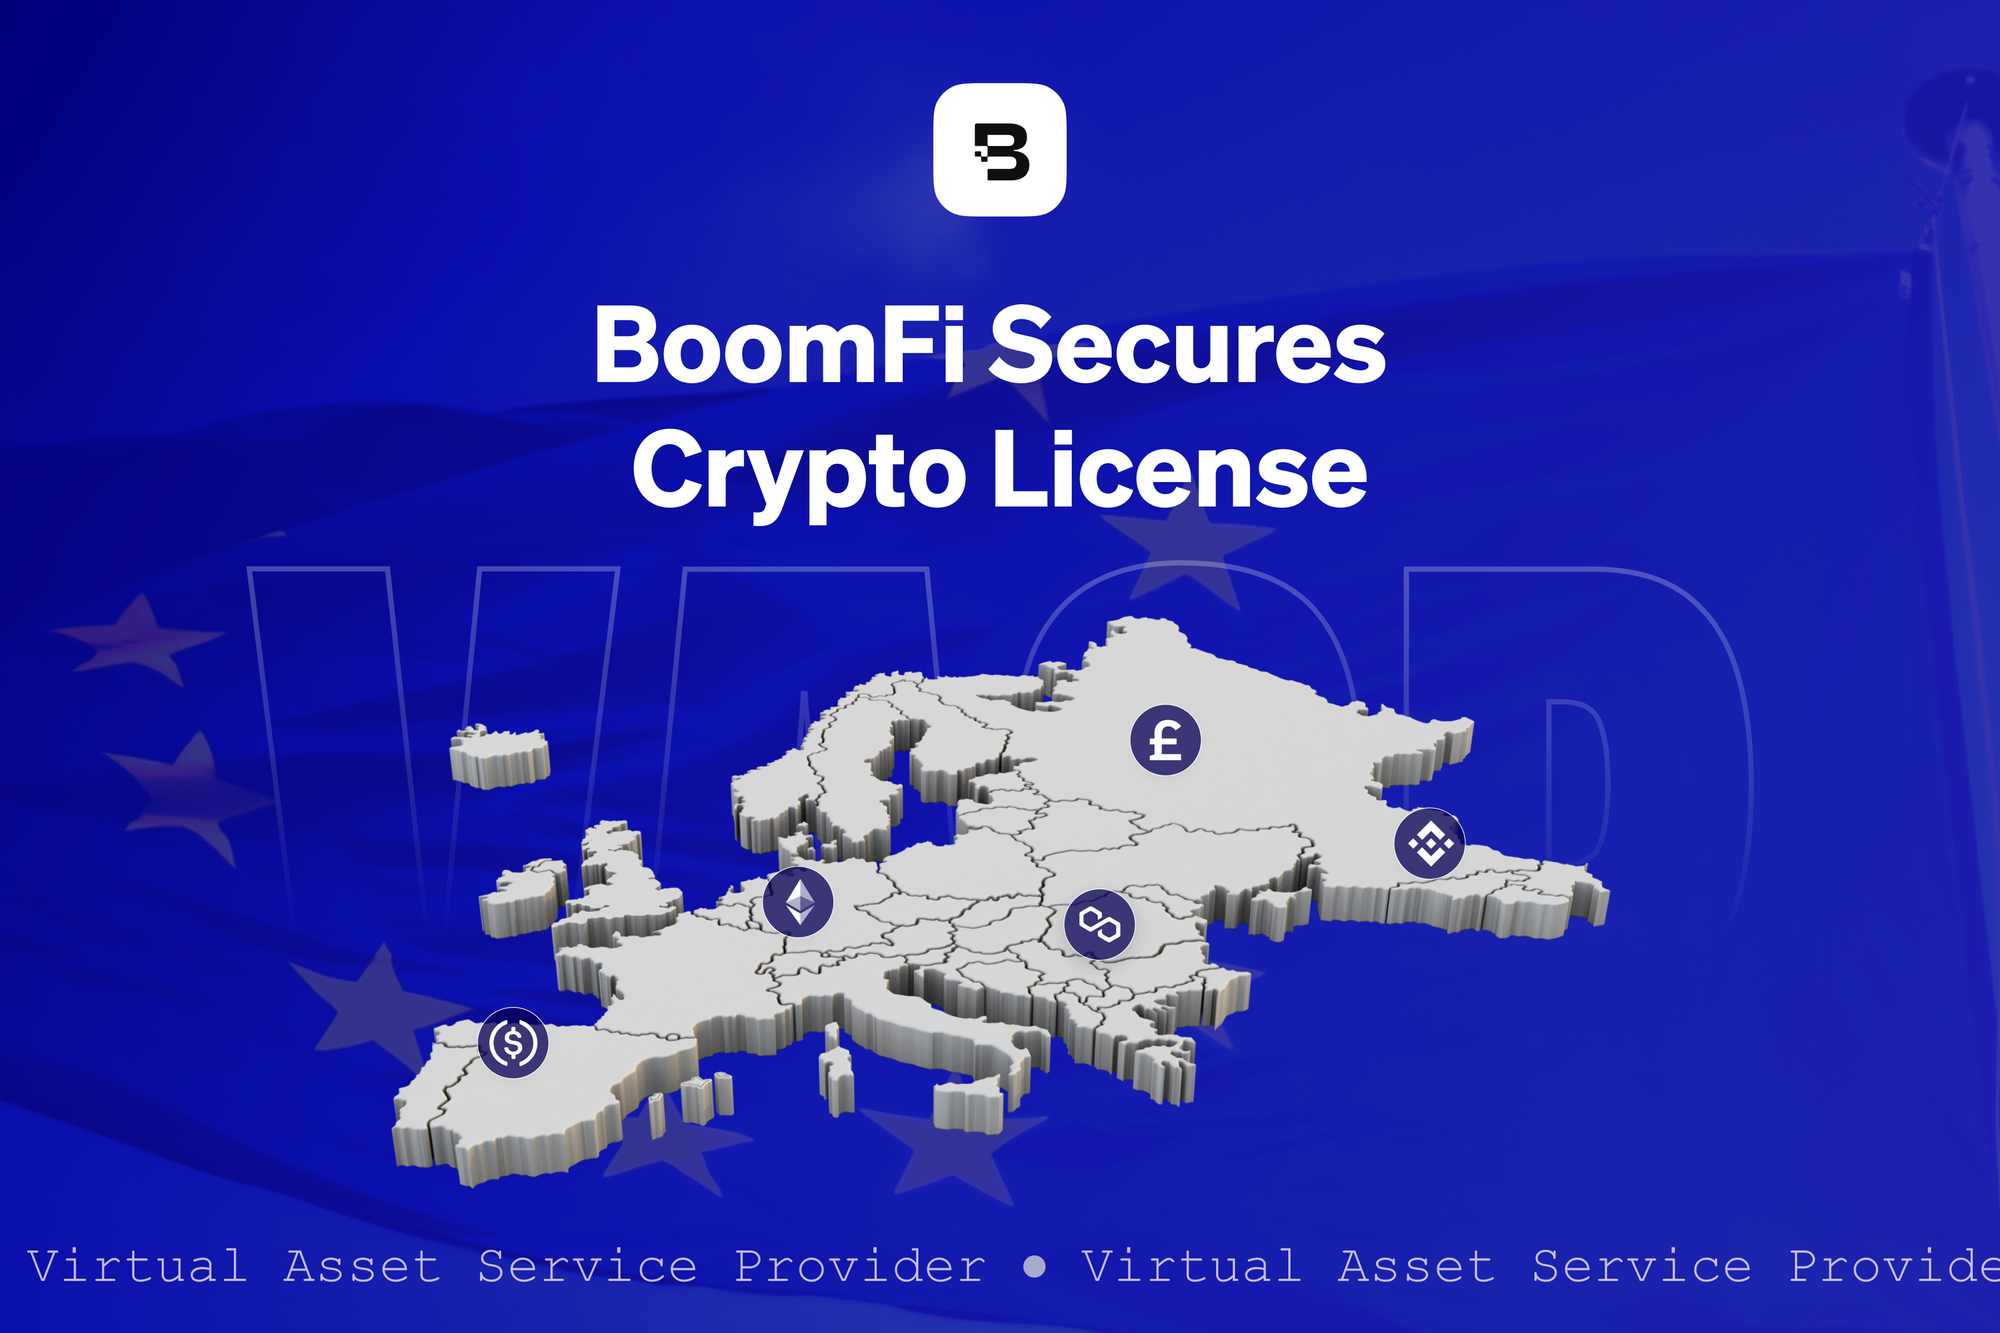 BoomFi Secures Registration as a Virtual Asset Service Provider (VASP) in Poland